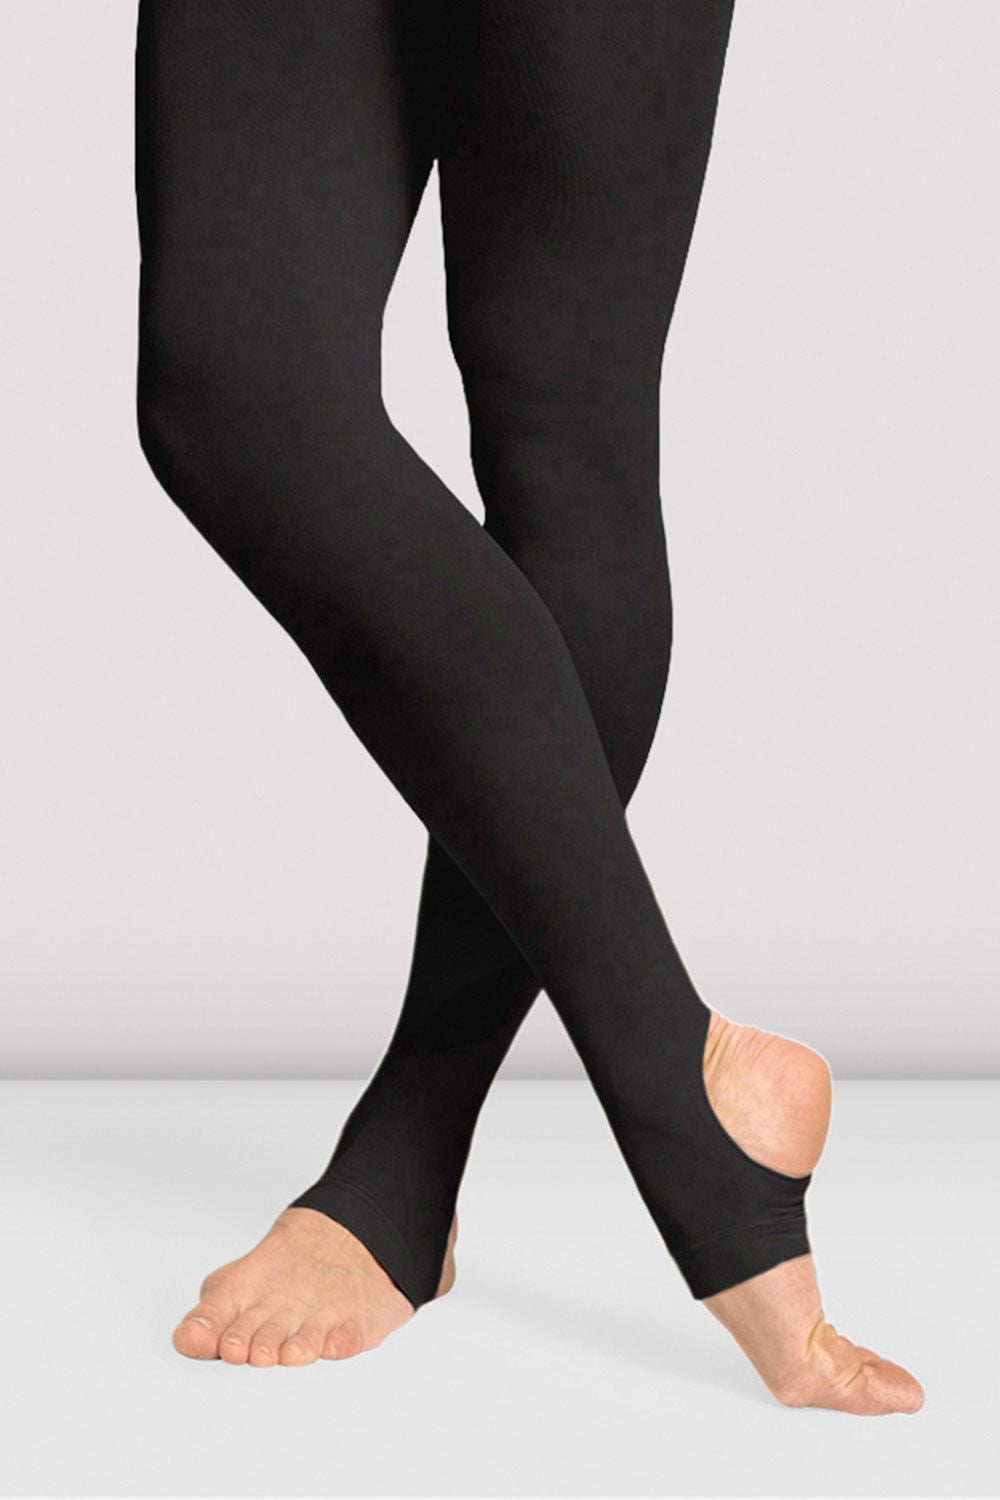 TotalSTRETCH Seamless Stirrup Tights – Barre & Pointe